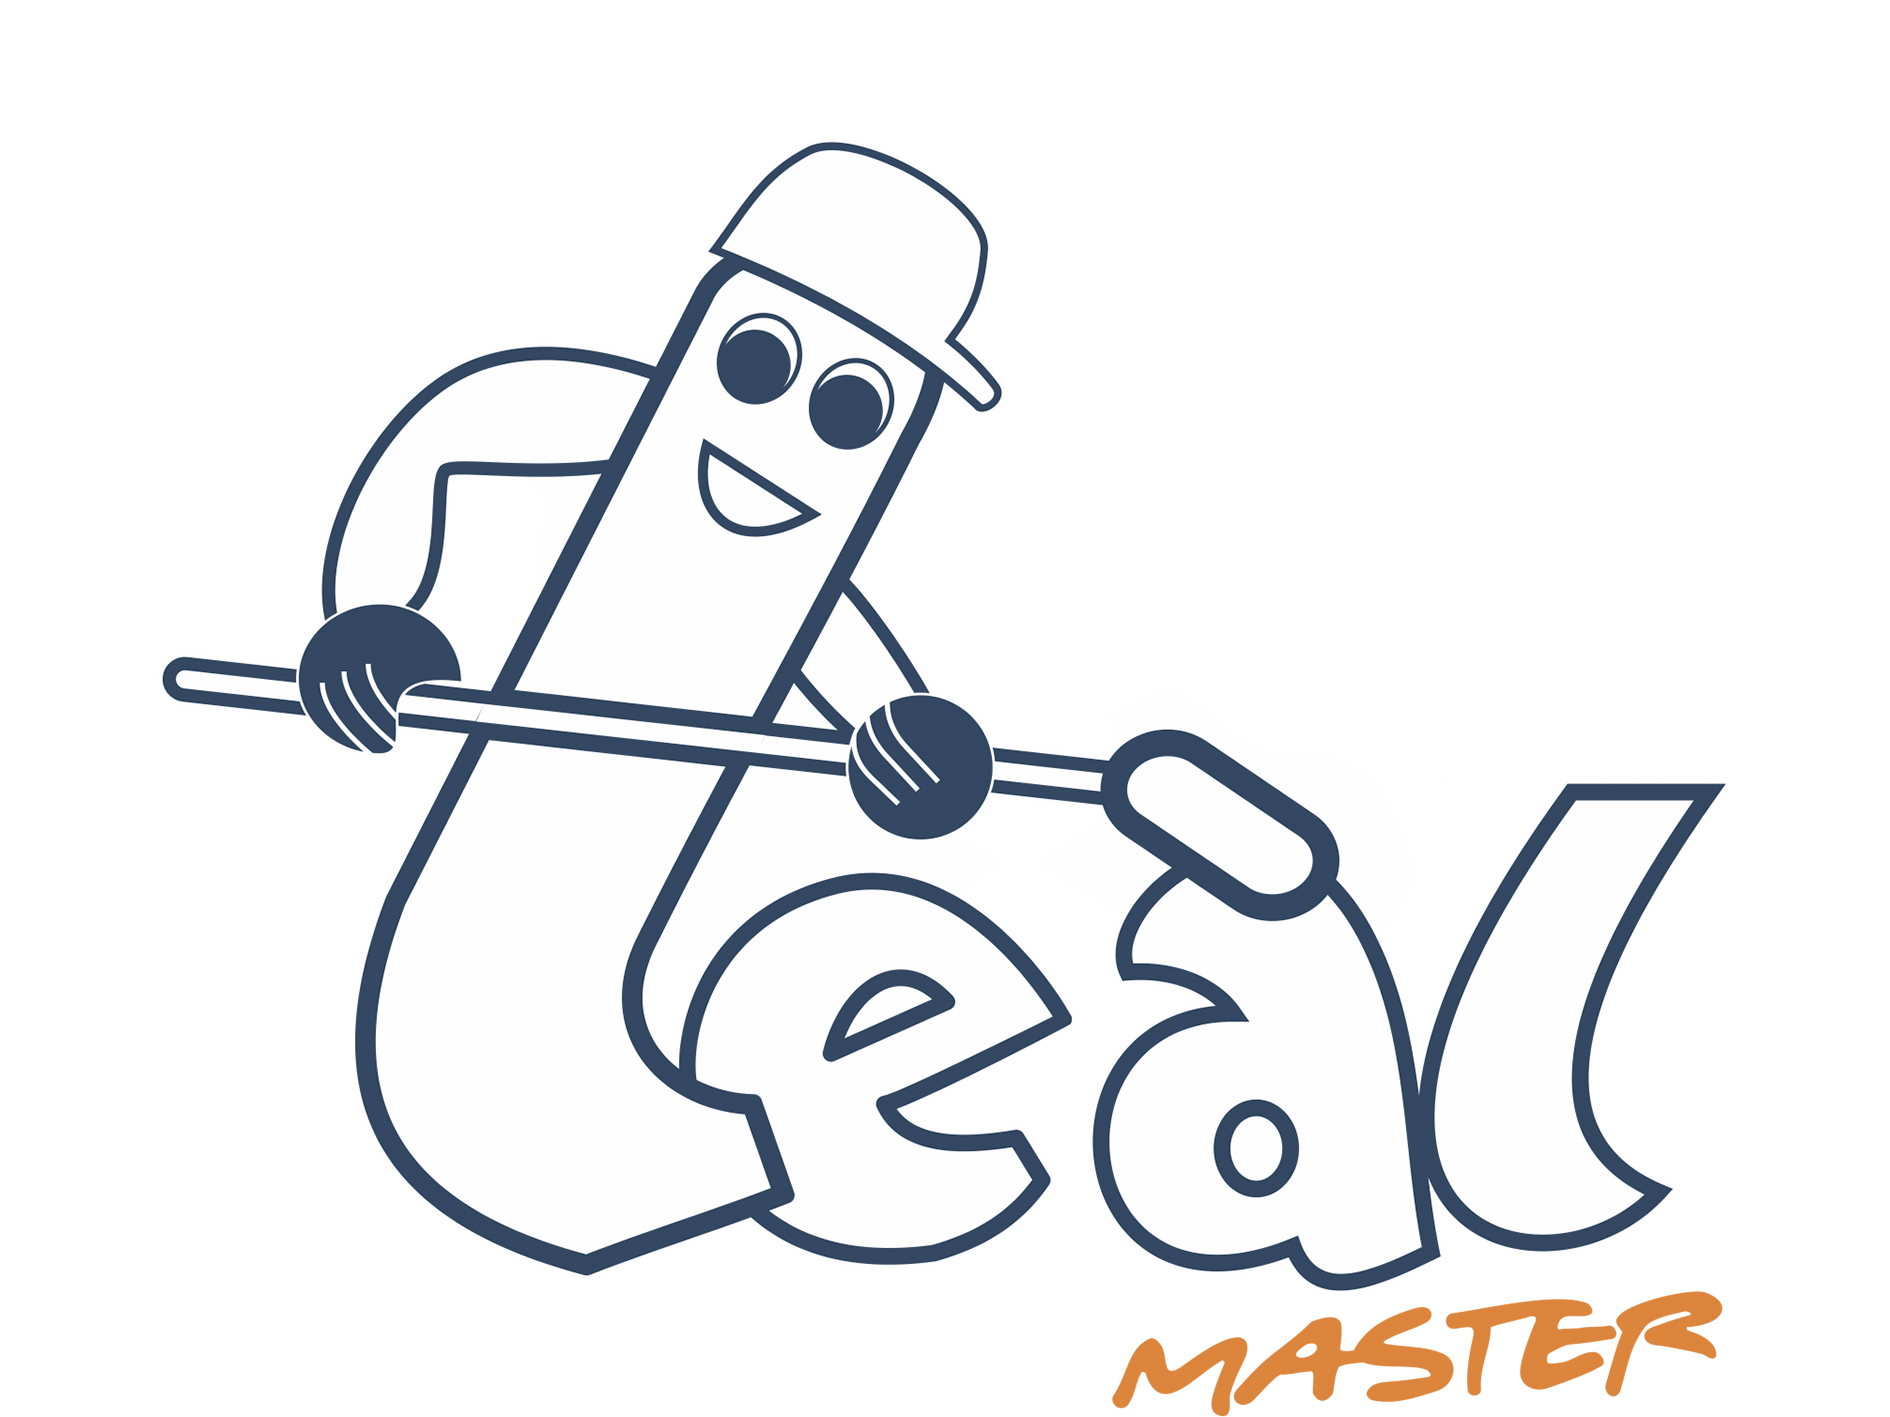 LEAL MASTER